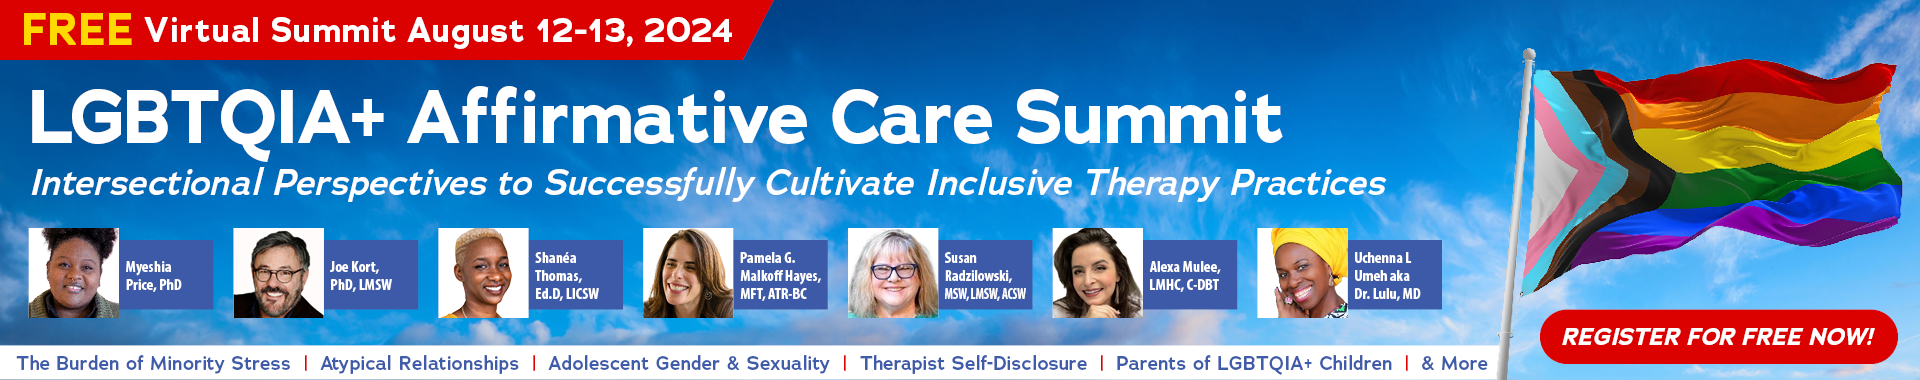 FREE ONLINE EVENT! | LGBTQIA+ Affirmative Care Summit: Intersectional Perspectives to Successfully Cultivate Inclusive Therapy Practices